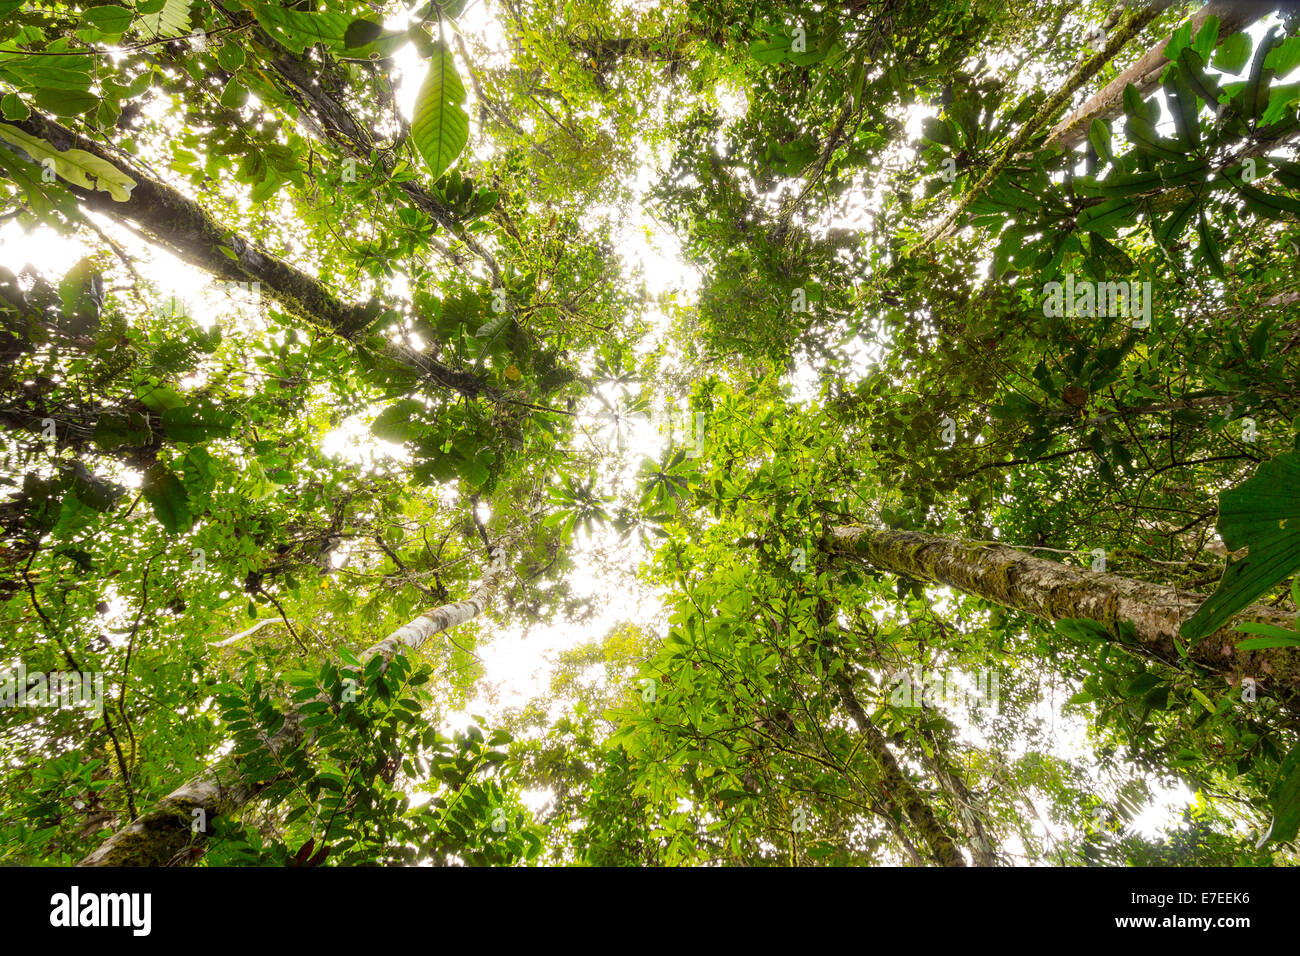 Looking up to the rainforest canopy in the Ecuadorian Amazon. Stock Photo